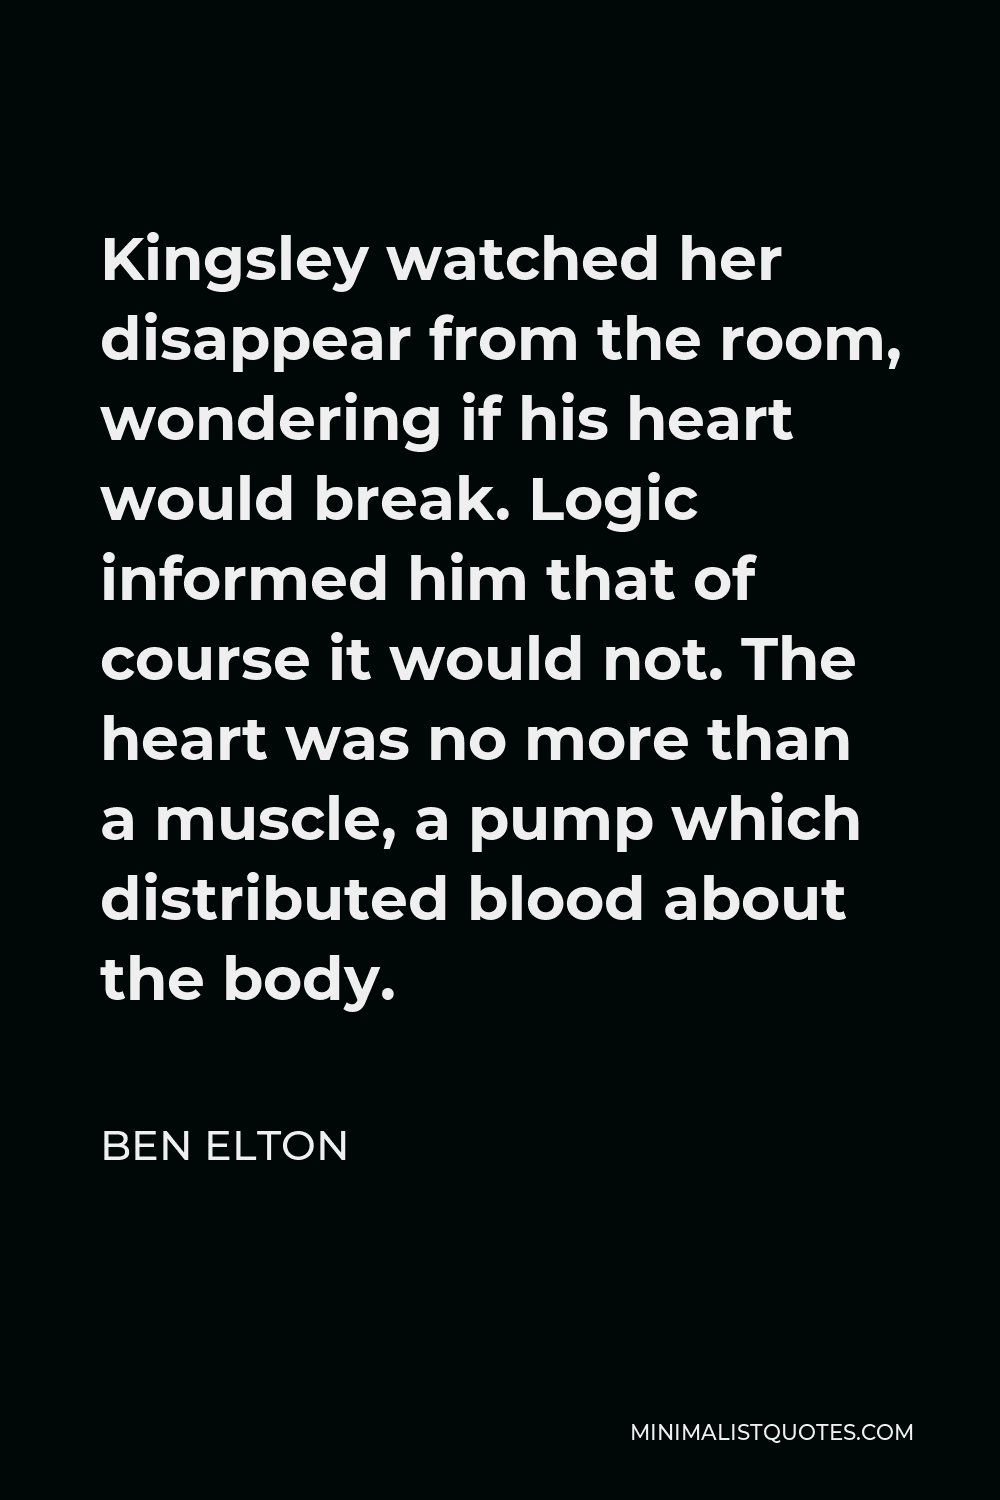 Ben Elton Quote - Kingsley watched her disappear from the room, wondering if his heart would break. Logic informed him that of course it would not. The heart was no more than a muscle, a pump which distributed blood about the body.